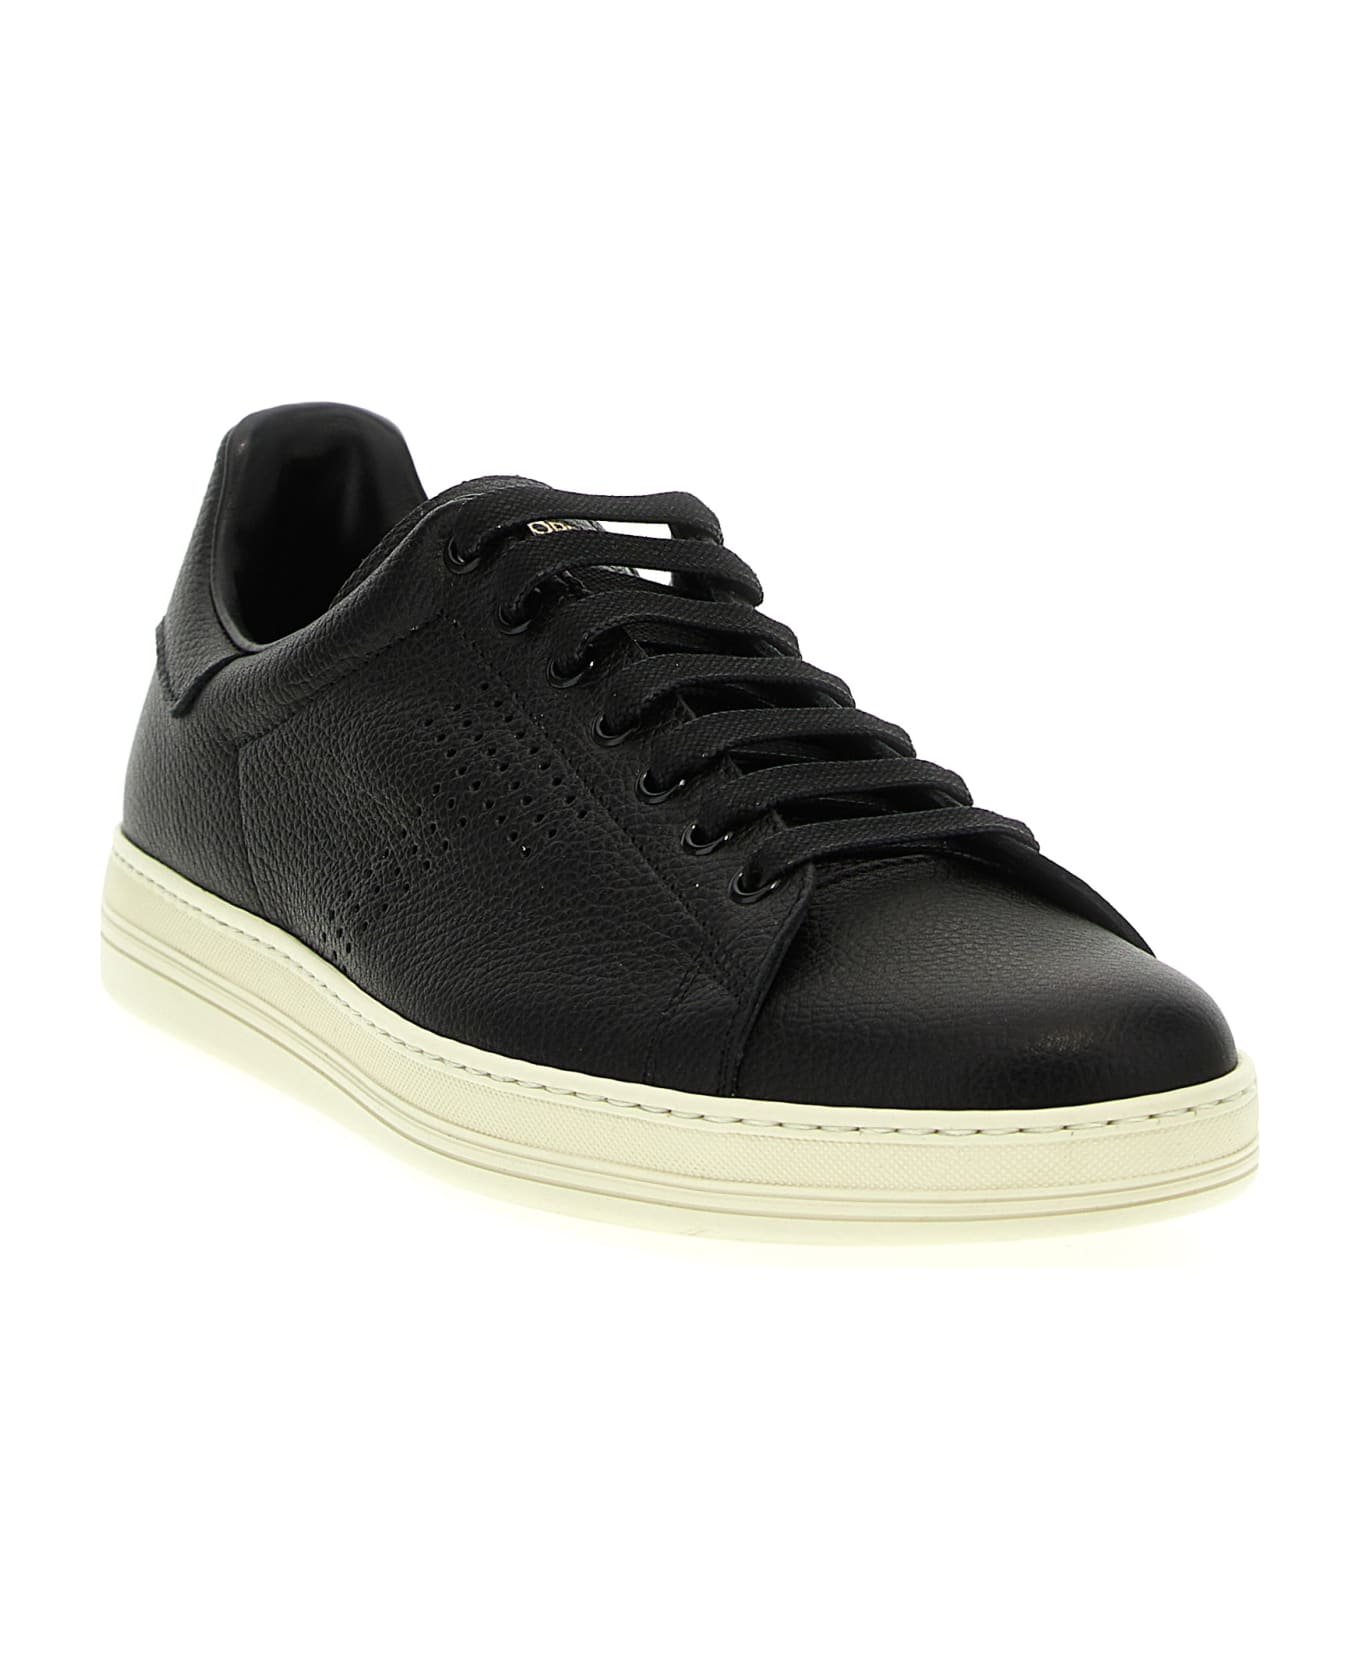 Tom Ford Logo Leather Sneakers - BLACK